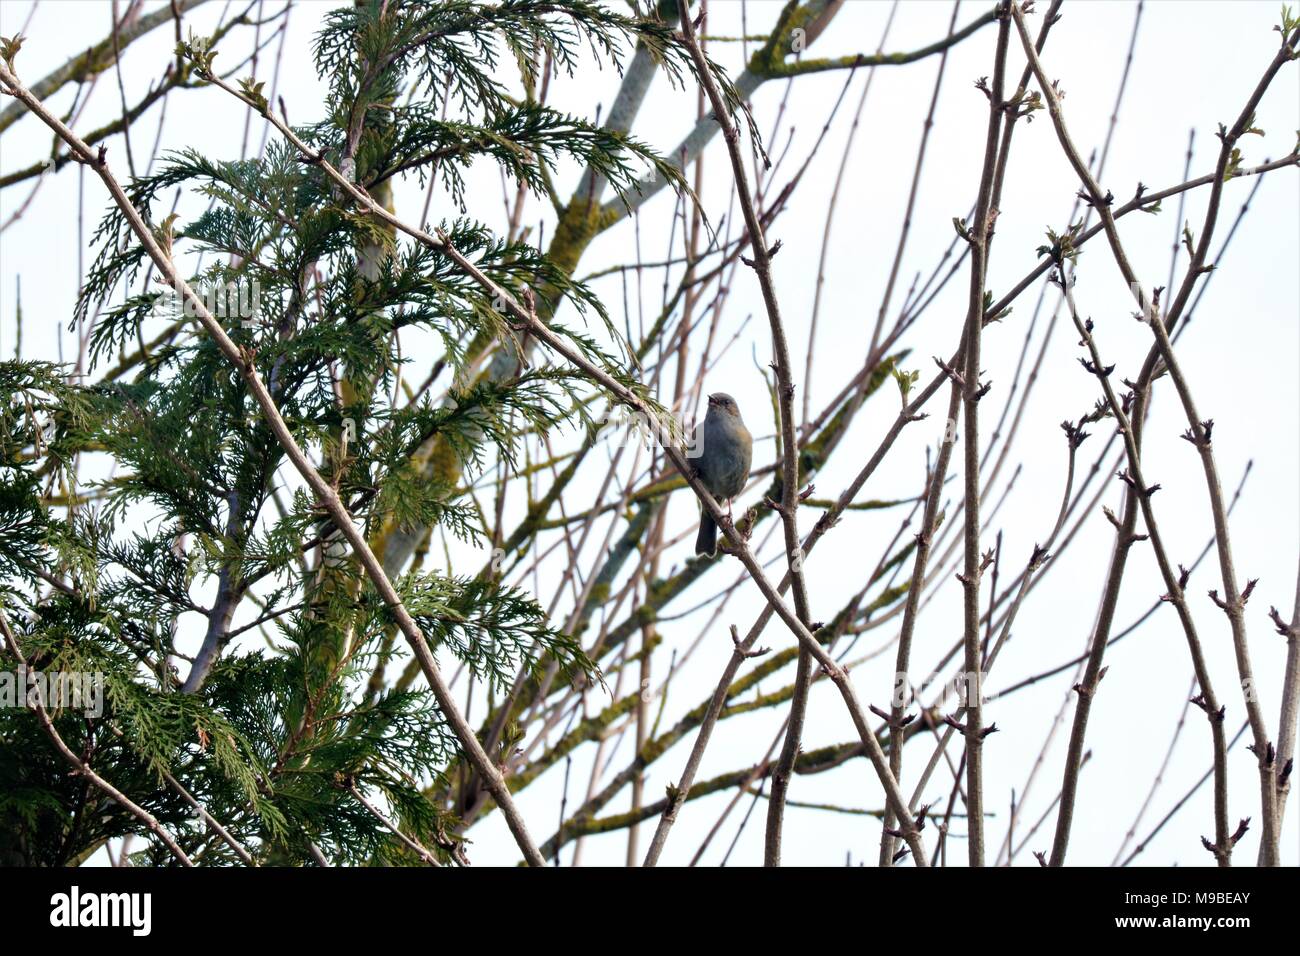 Dunnock / Hedge Sparrow perching in tree against a white sky in Spring Stock Photo